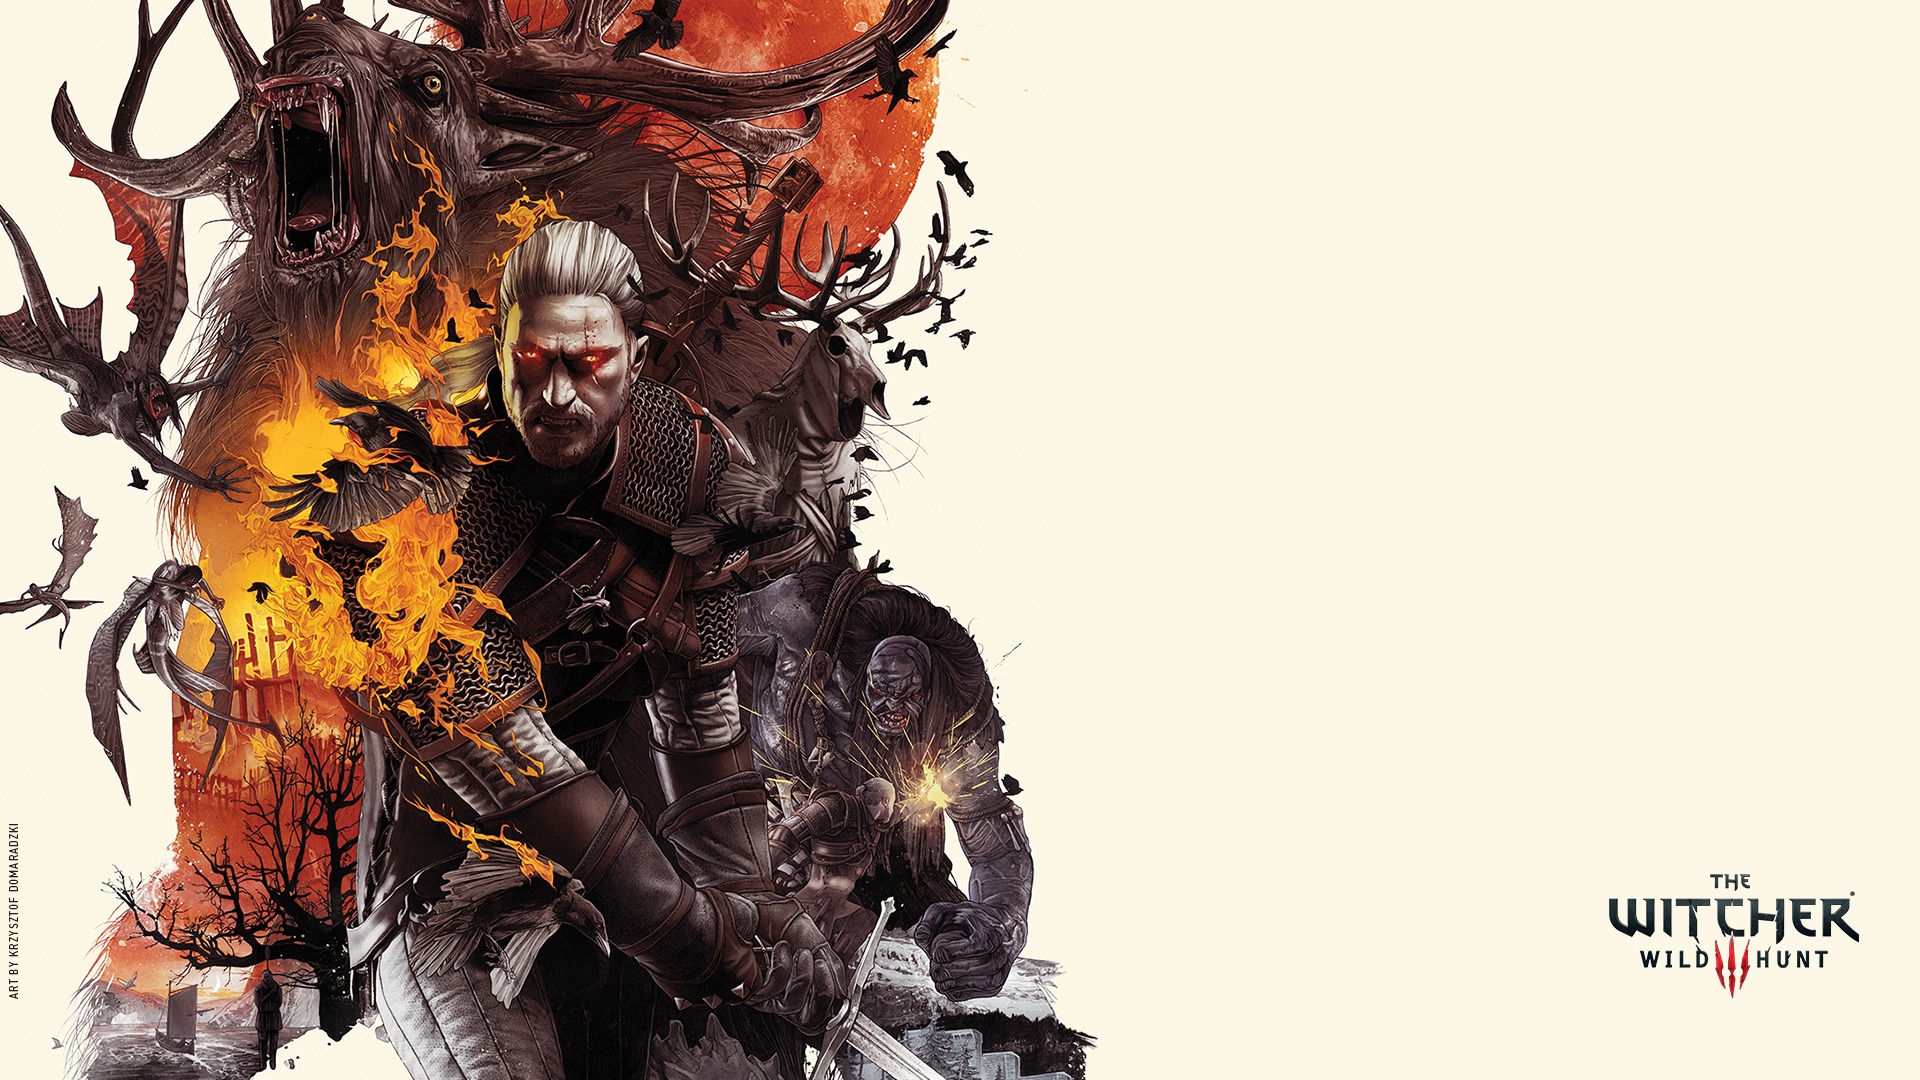 the witcher wallpaper 1920x1080,action adventure game,cg artwork,illustration,pc game,fictional character